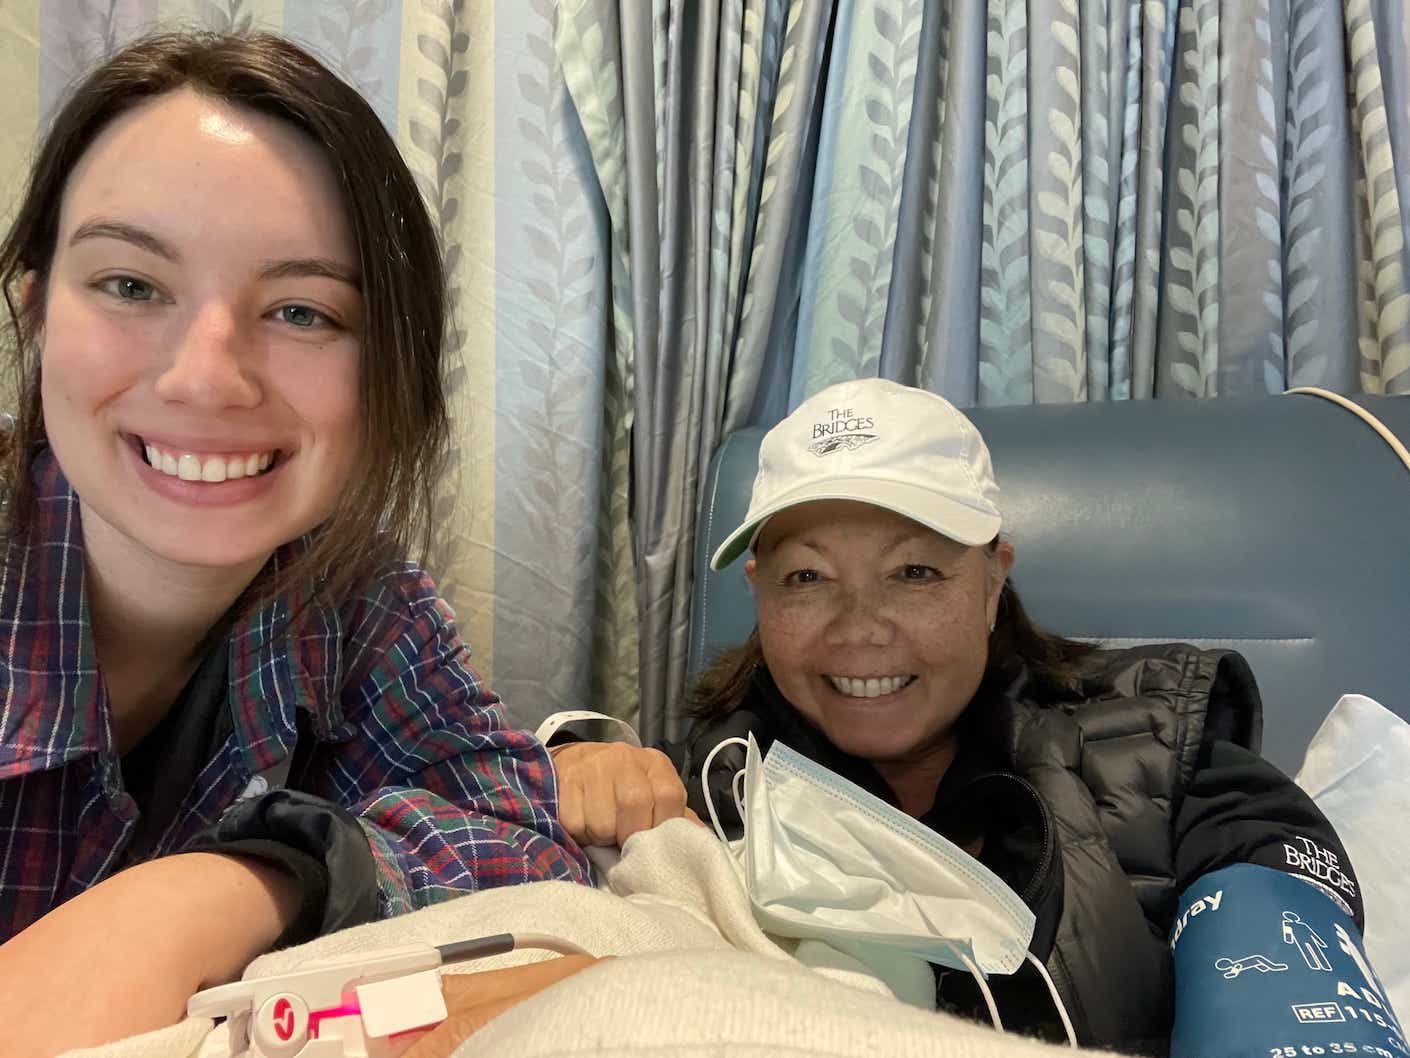 Donna Otis and her daughter at the hospital